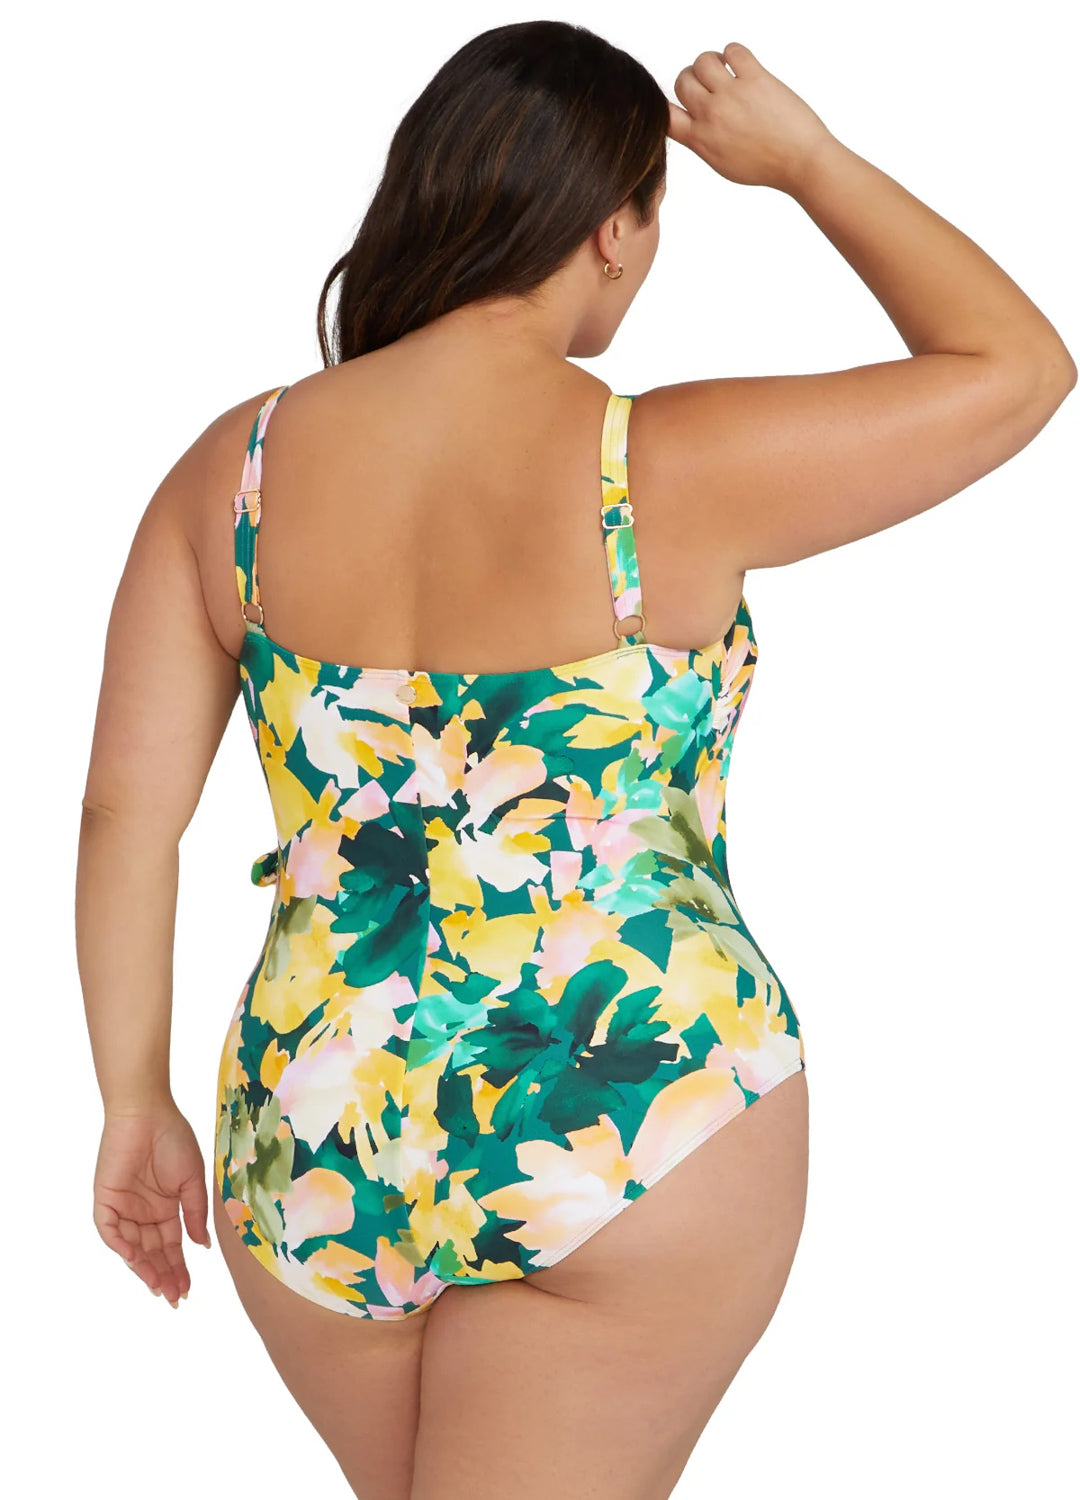 Artesands Australia Hayes D / DD Cup Underwire One Piece Swimsuit in Les Nabis floral pattern at Inner Beach Co, Toronto, Ontario, Canada